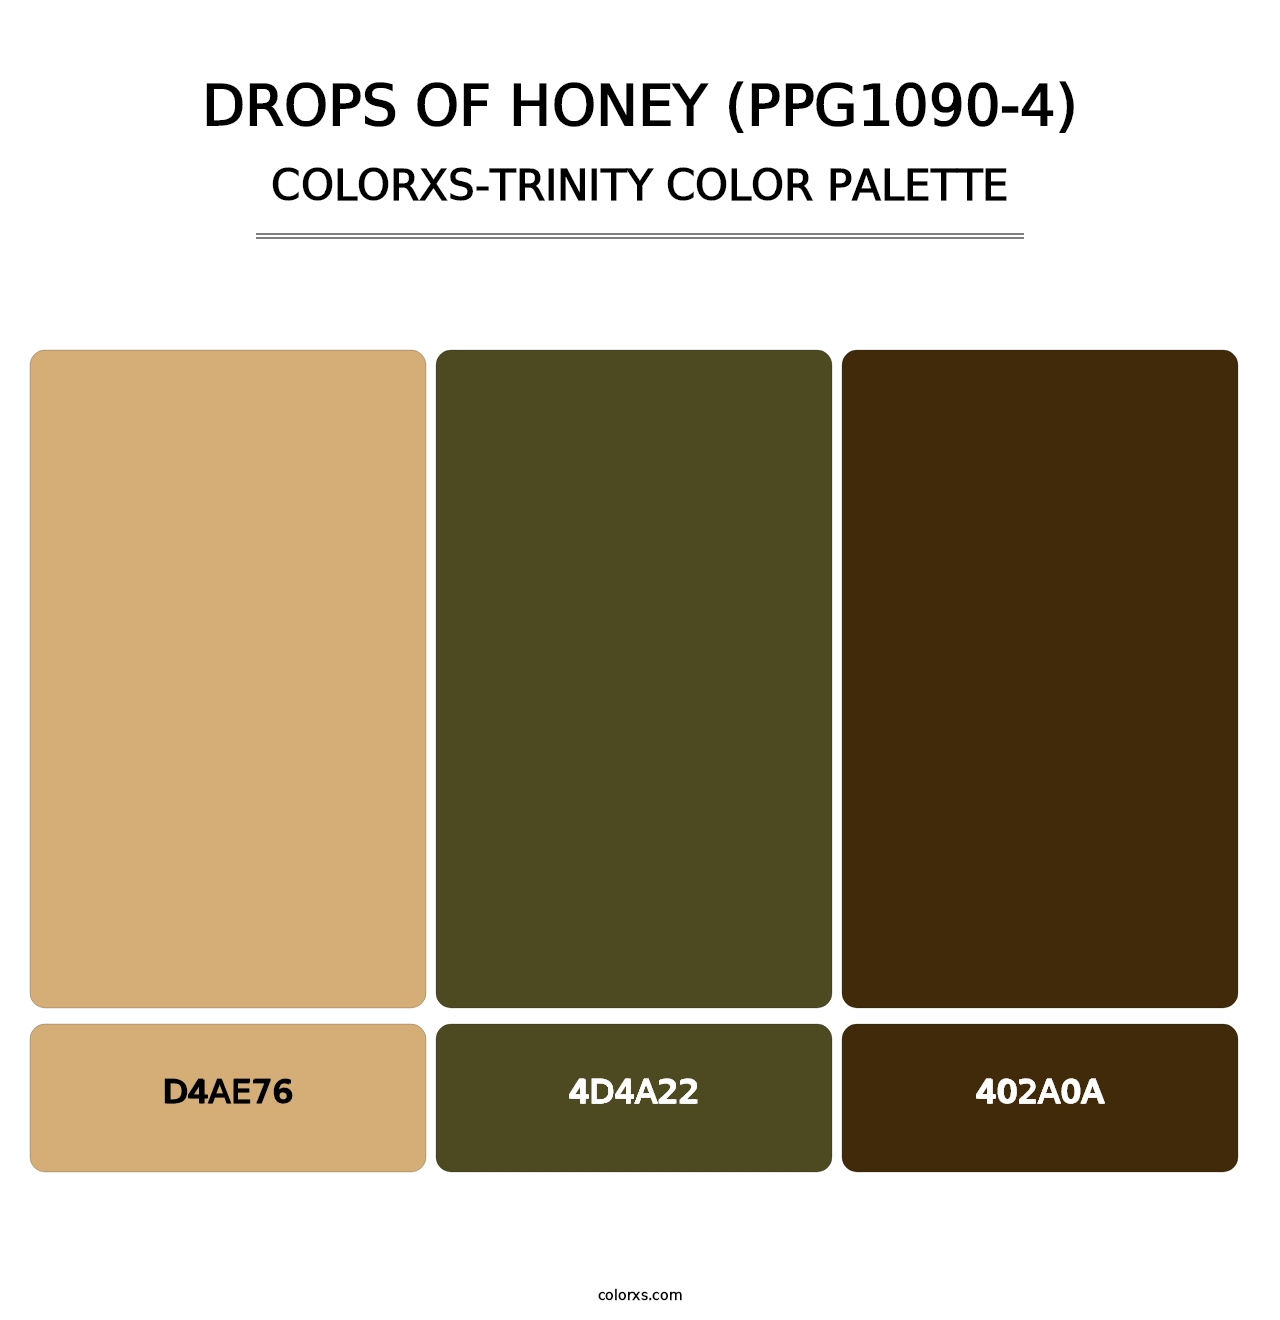 Drops Of Honey (PPG1090-4) - Colorxs Trinity Palette